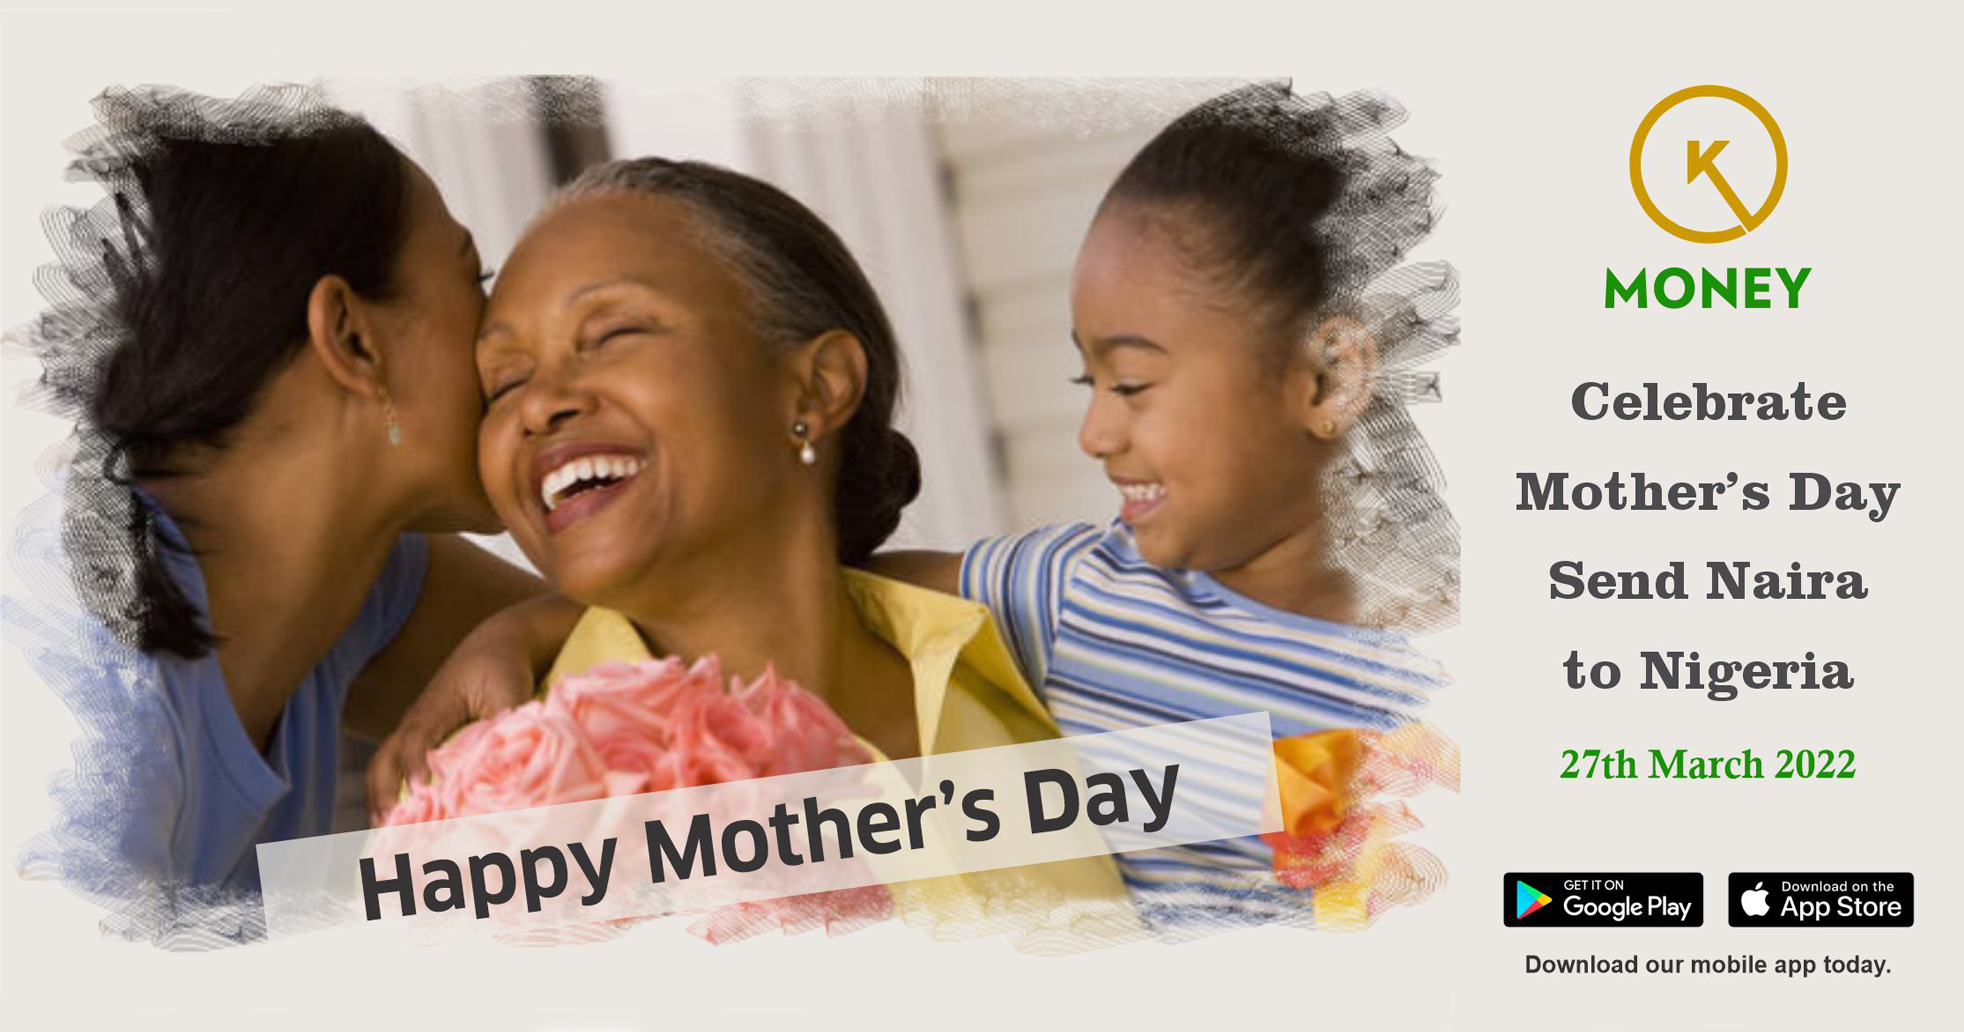 Happy Mothers Day – Send Naira to Nigeria